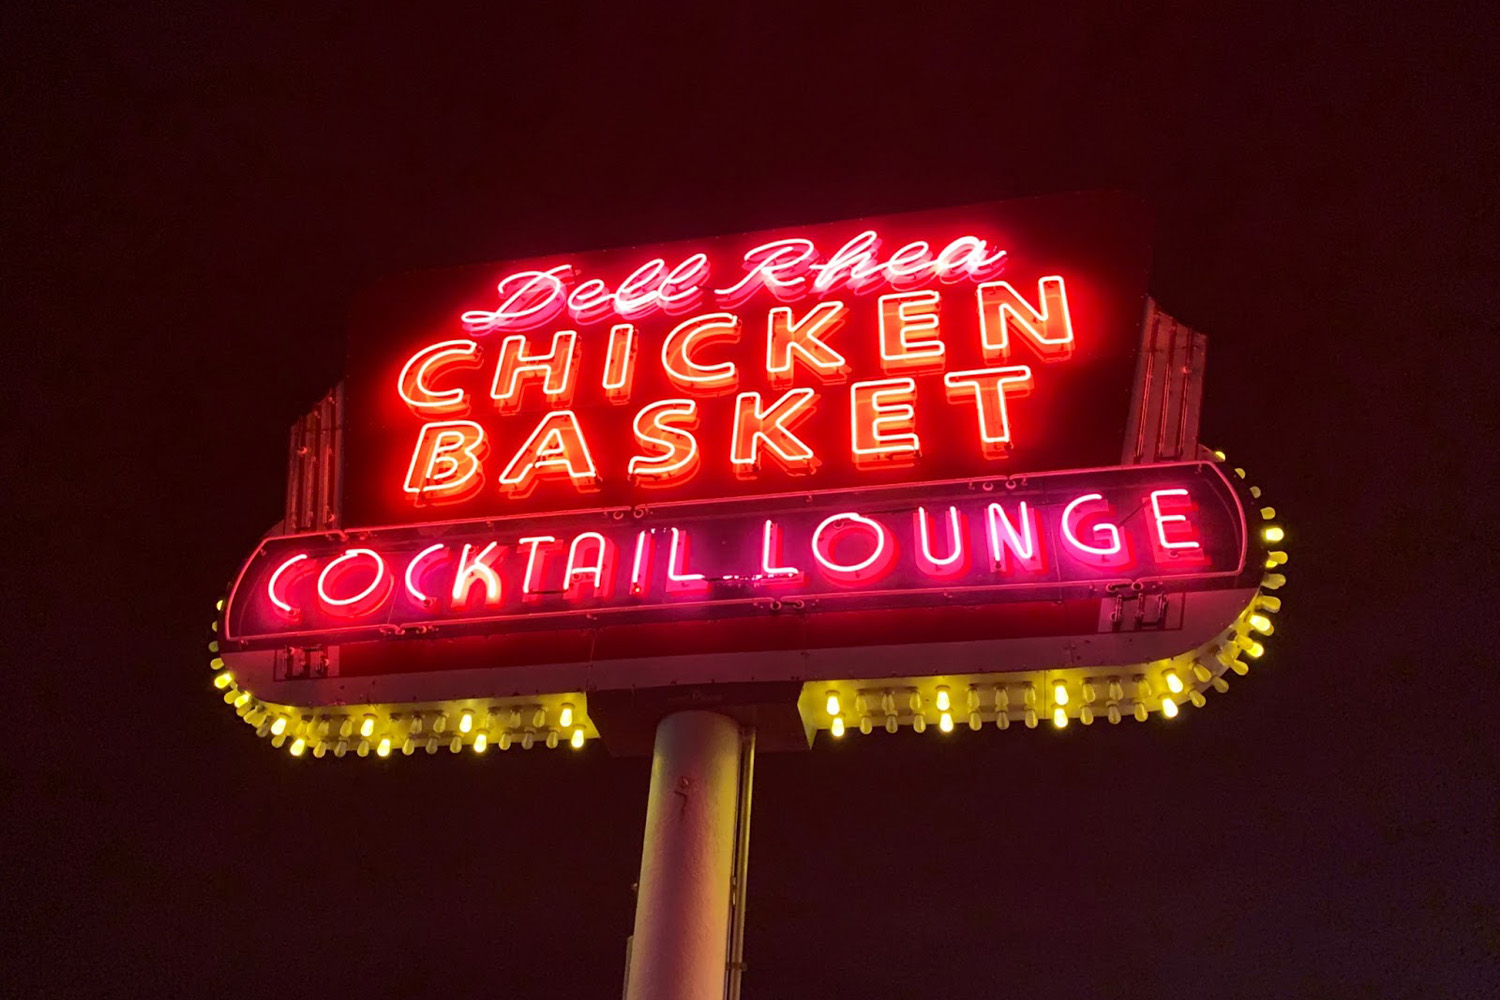 Dell Rhea’s Chicken Basket sign at night, Willowbrook, IL on Route 66